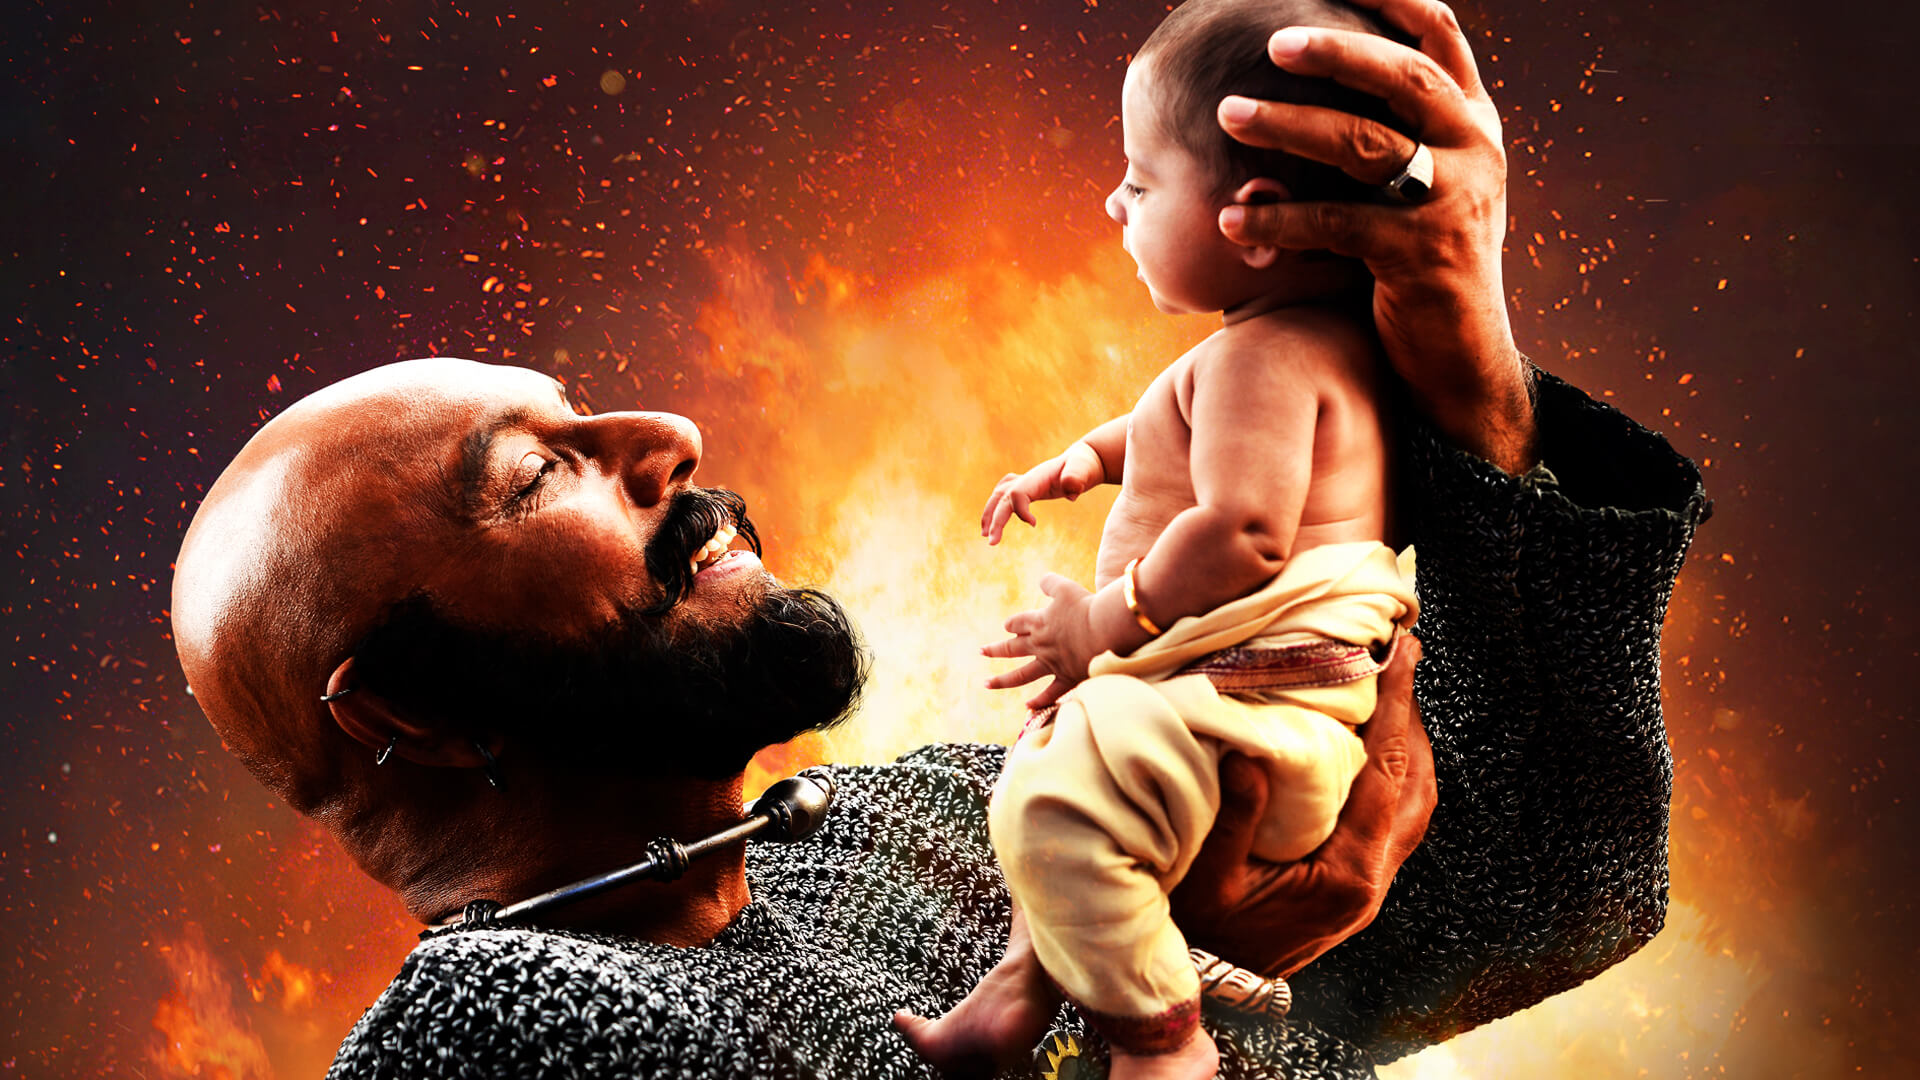 Why Kattappa Killed Bahubali You May Get Answers Now These 25 Scenes